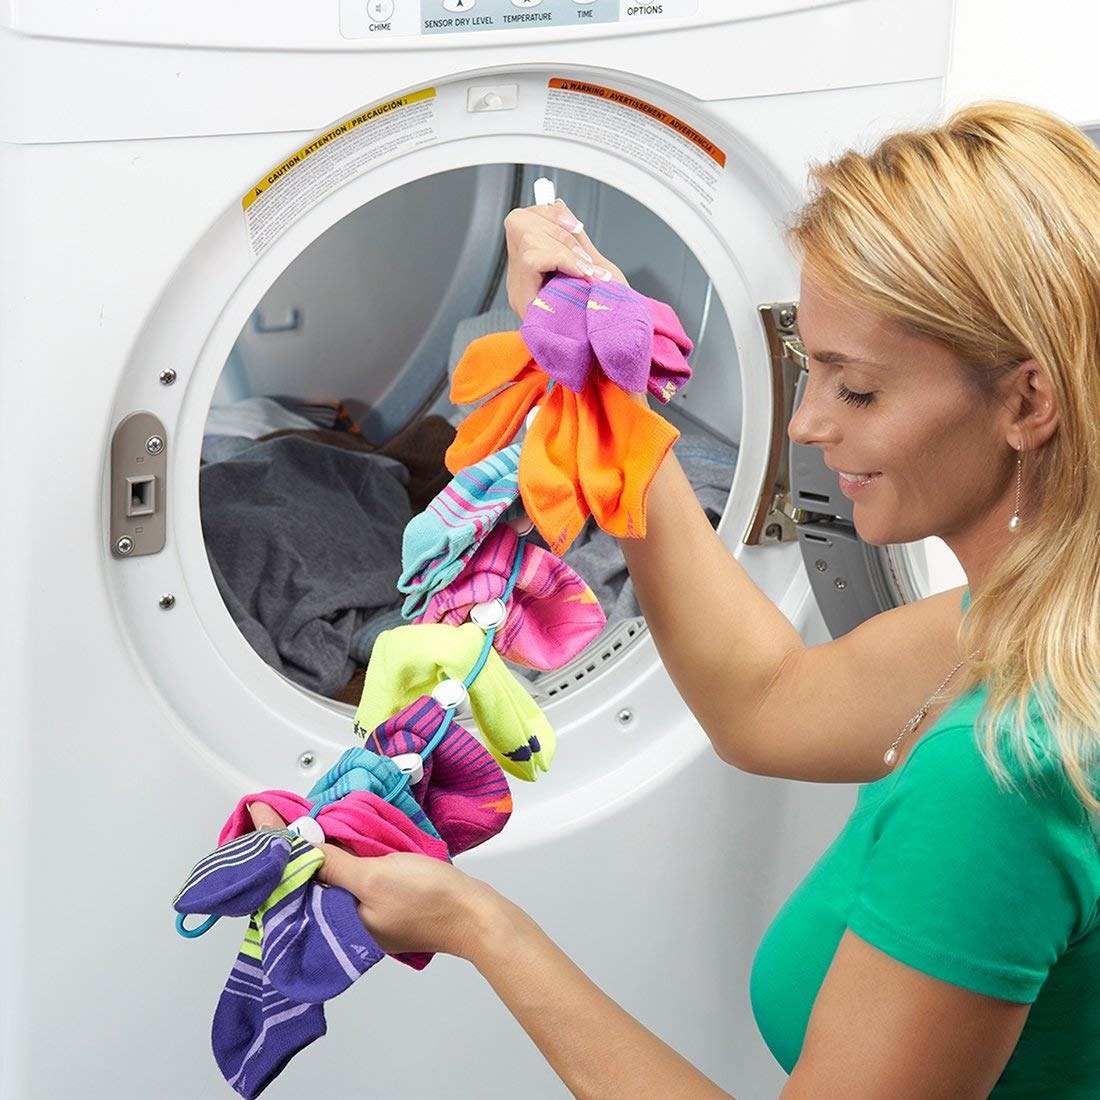 Model clipping socks in the sock dock before putting it in the washing machine